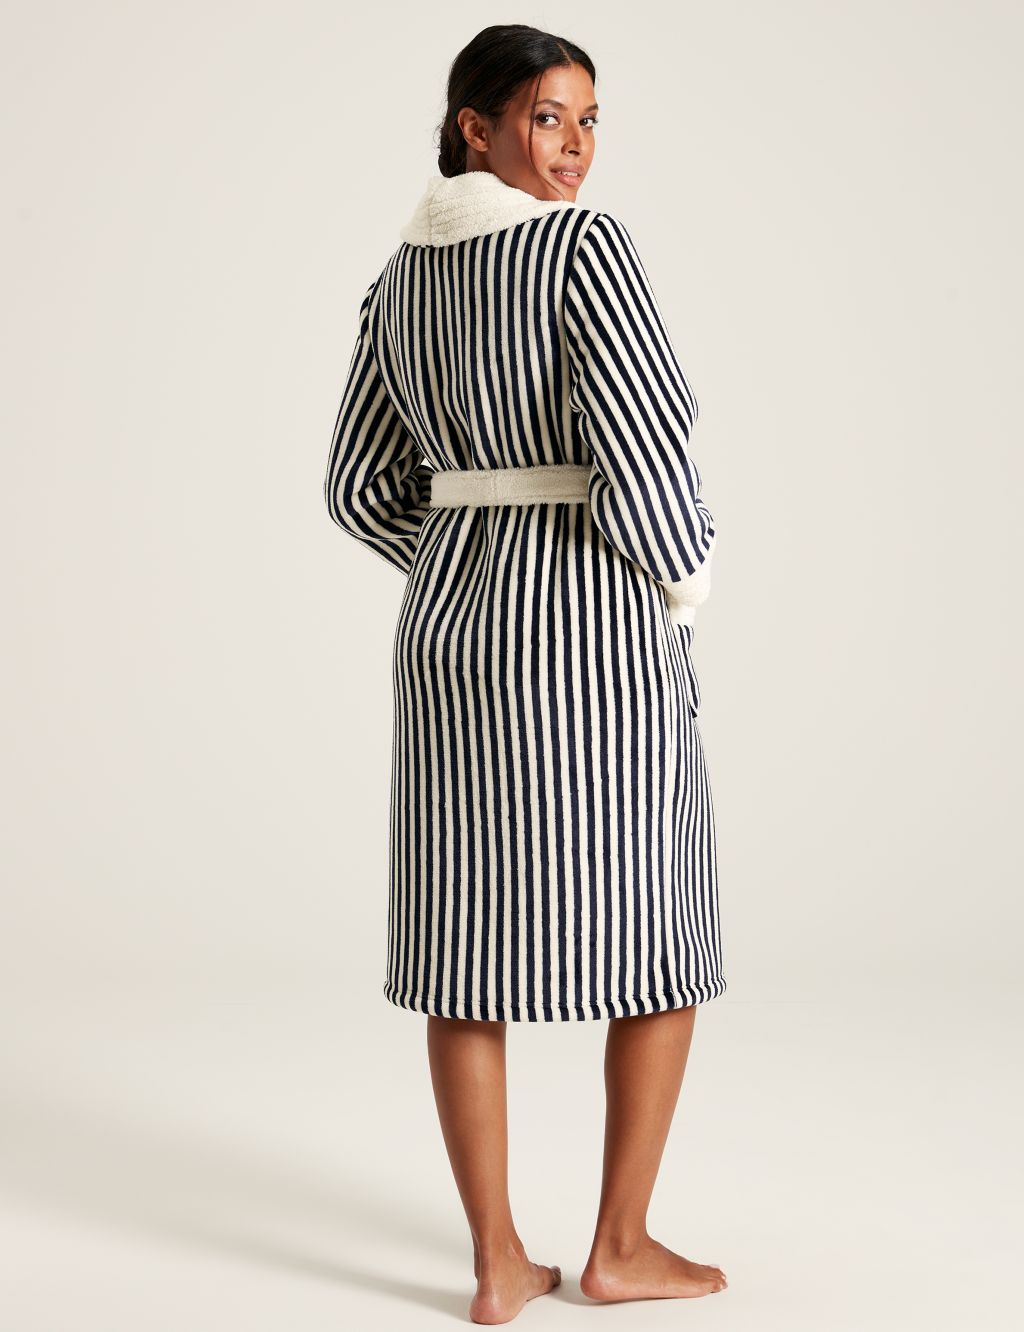 Cotton Modal Striped Dressing Gown image 5